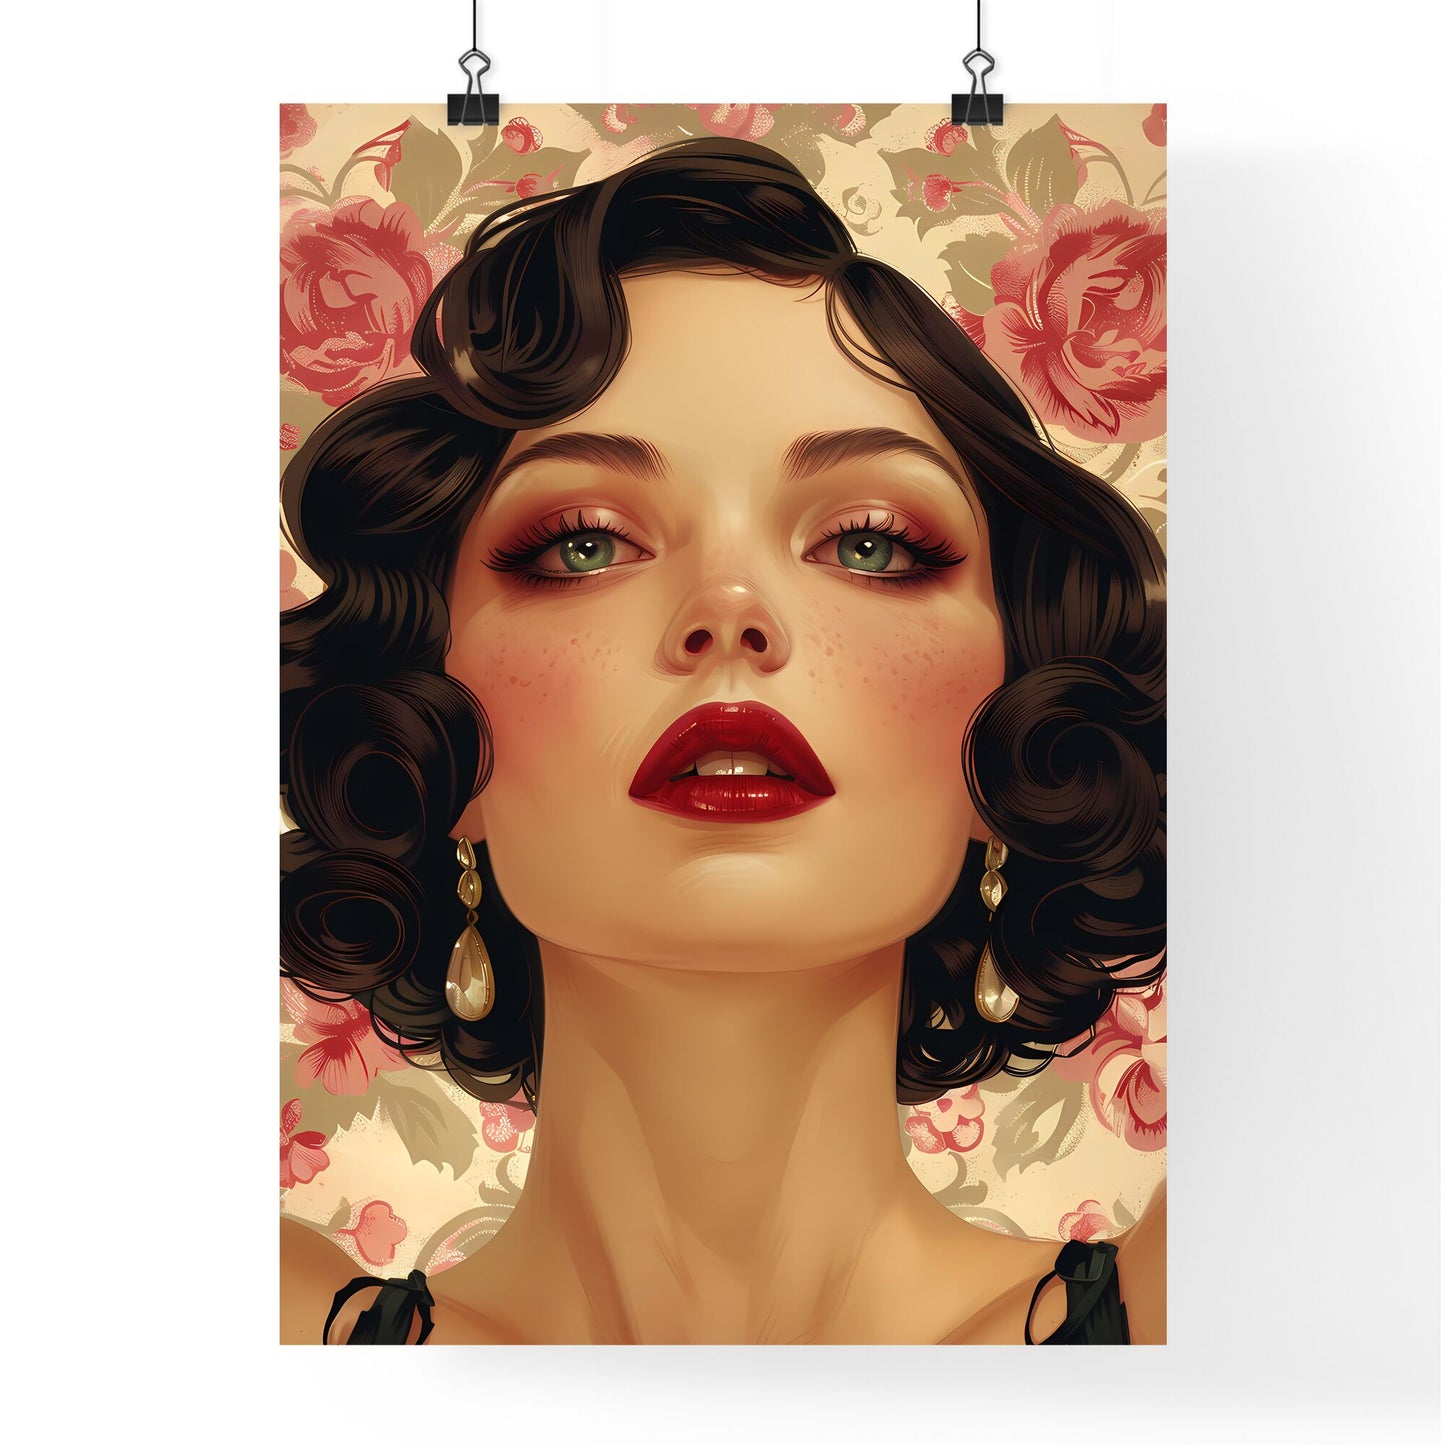 Art Deco Pin-Up Girl Portrait: Vintage Fashionable Starlet with Red Lipstick & Curly Hair Default Title